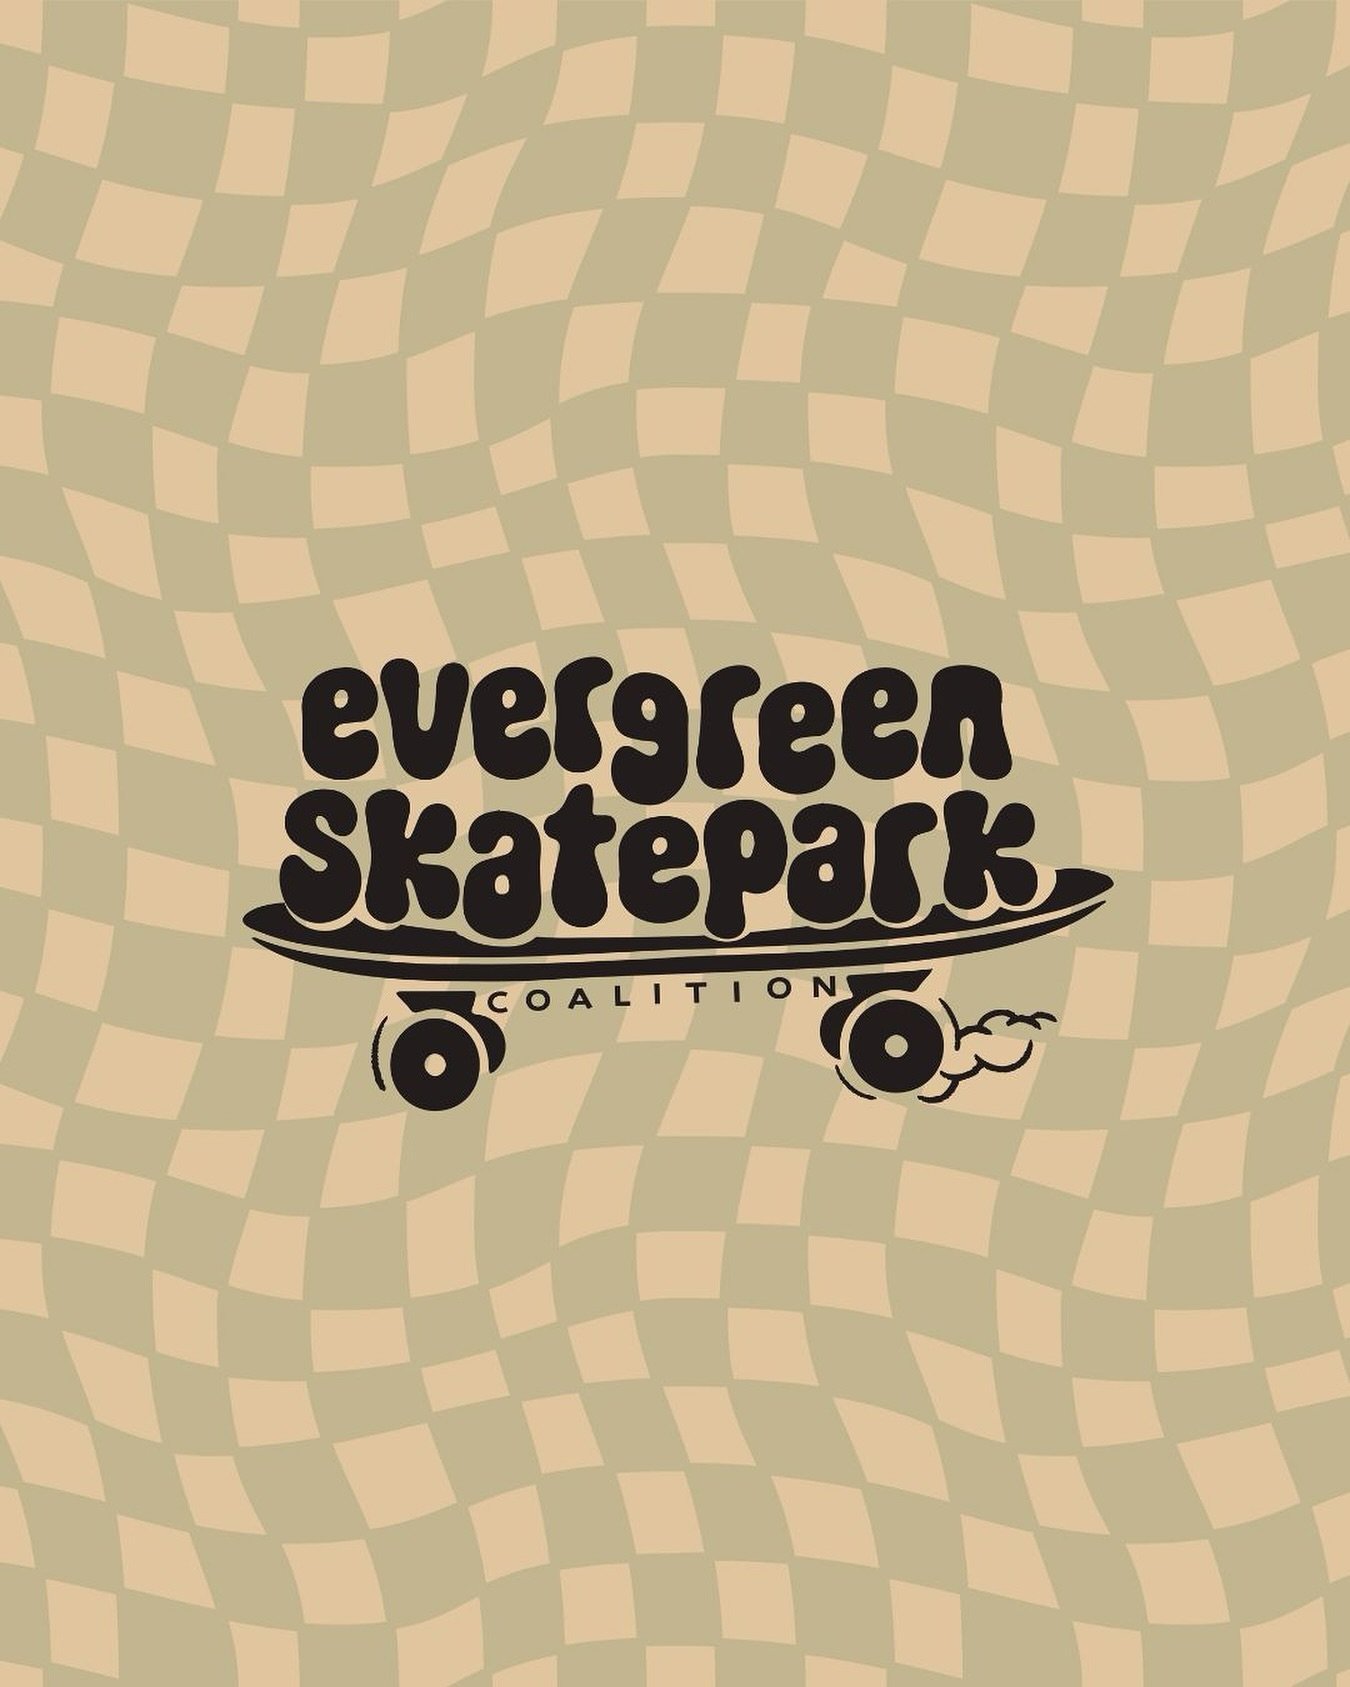 Switching gears from my usual holistic wellness brand design content today! 🛹✨

Today is a huge, exciting day for the Evergreen Skate Park Coalition! As an artist and momma, nothing fills my heart more than supporting our community's incredible kids